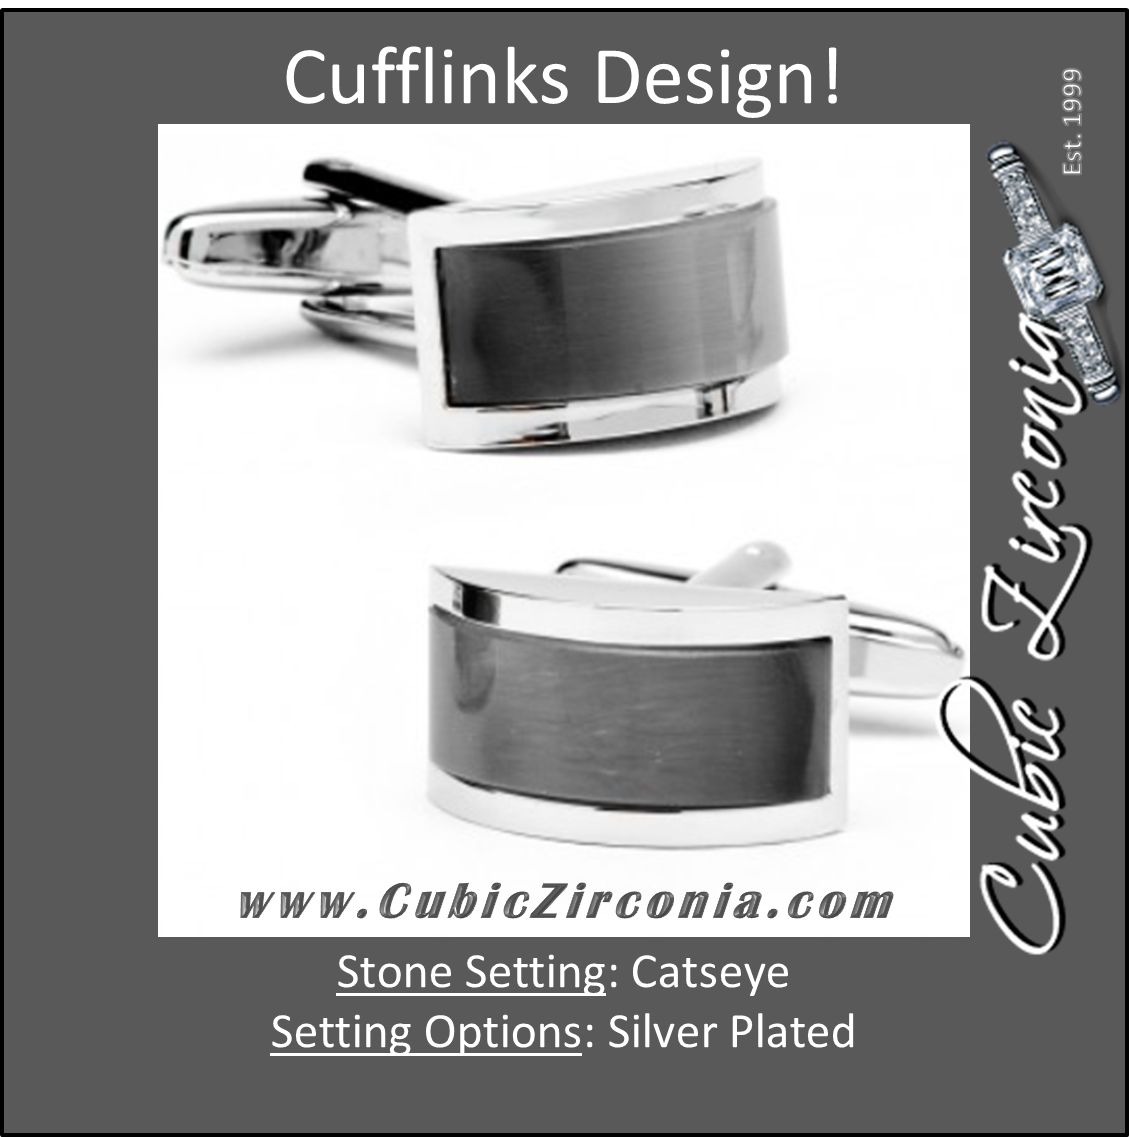 Men’s Cufflinks- Silver Plated Curved Bridge Style with Grey Catseye